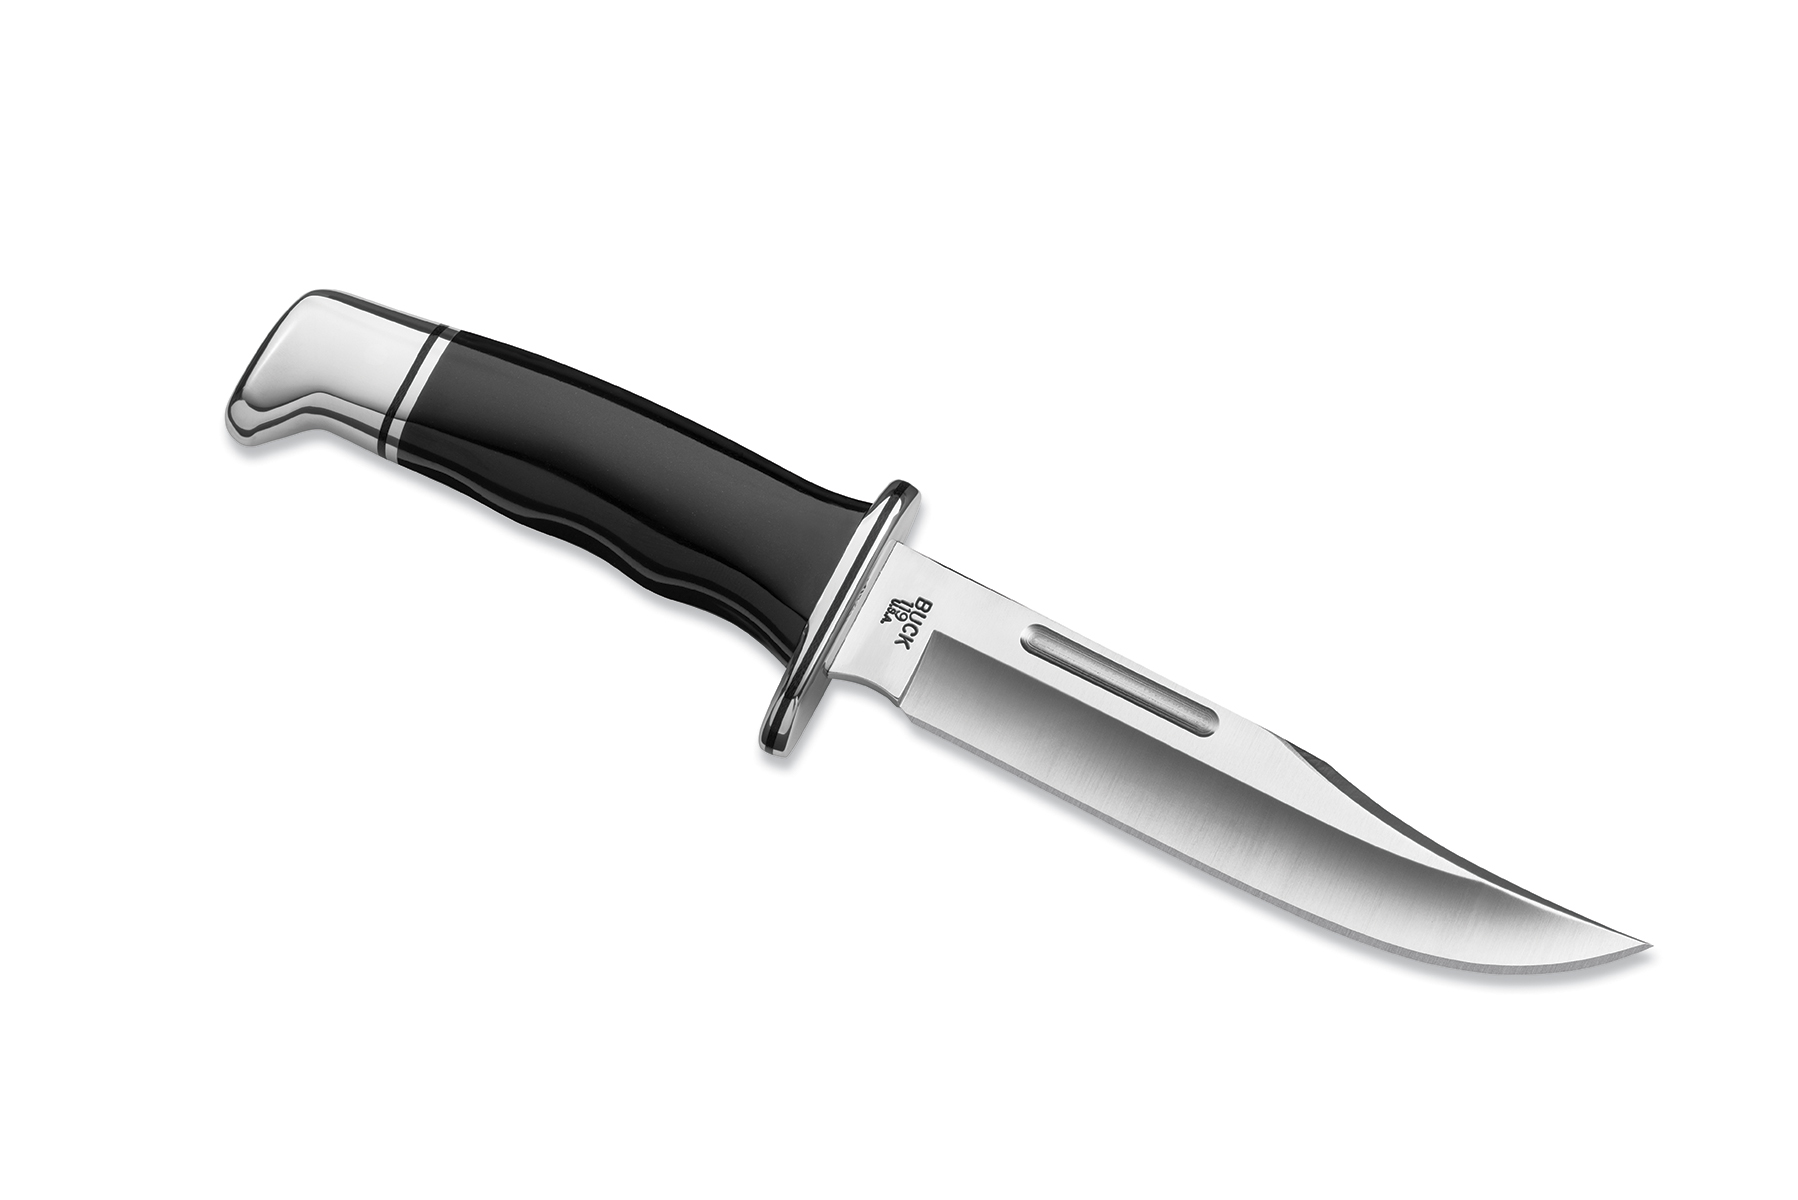 Buck Special Fixed Blade Knife